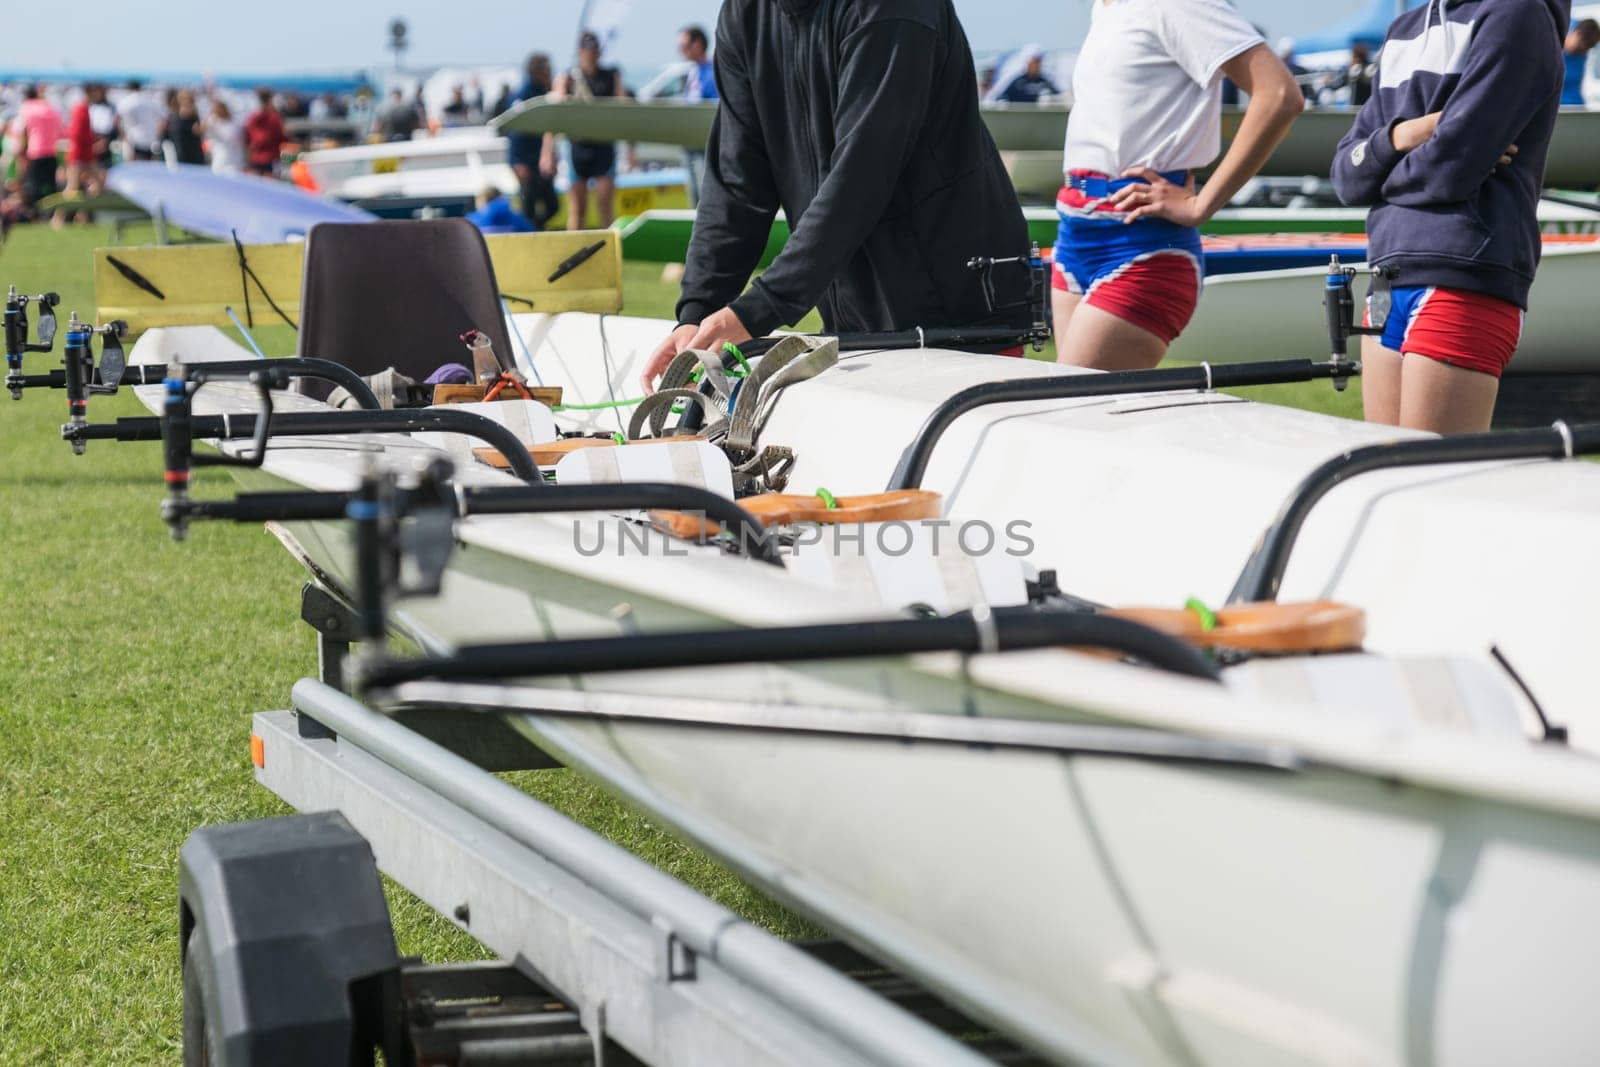 French Rowing Championship. Water Rowing boats on the grass.